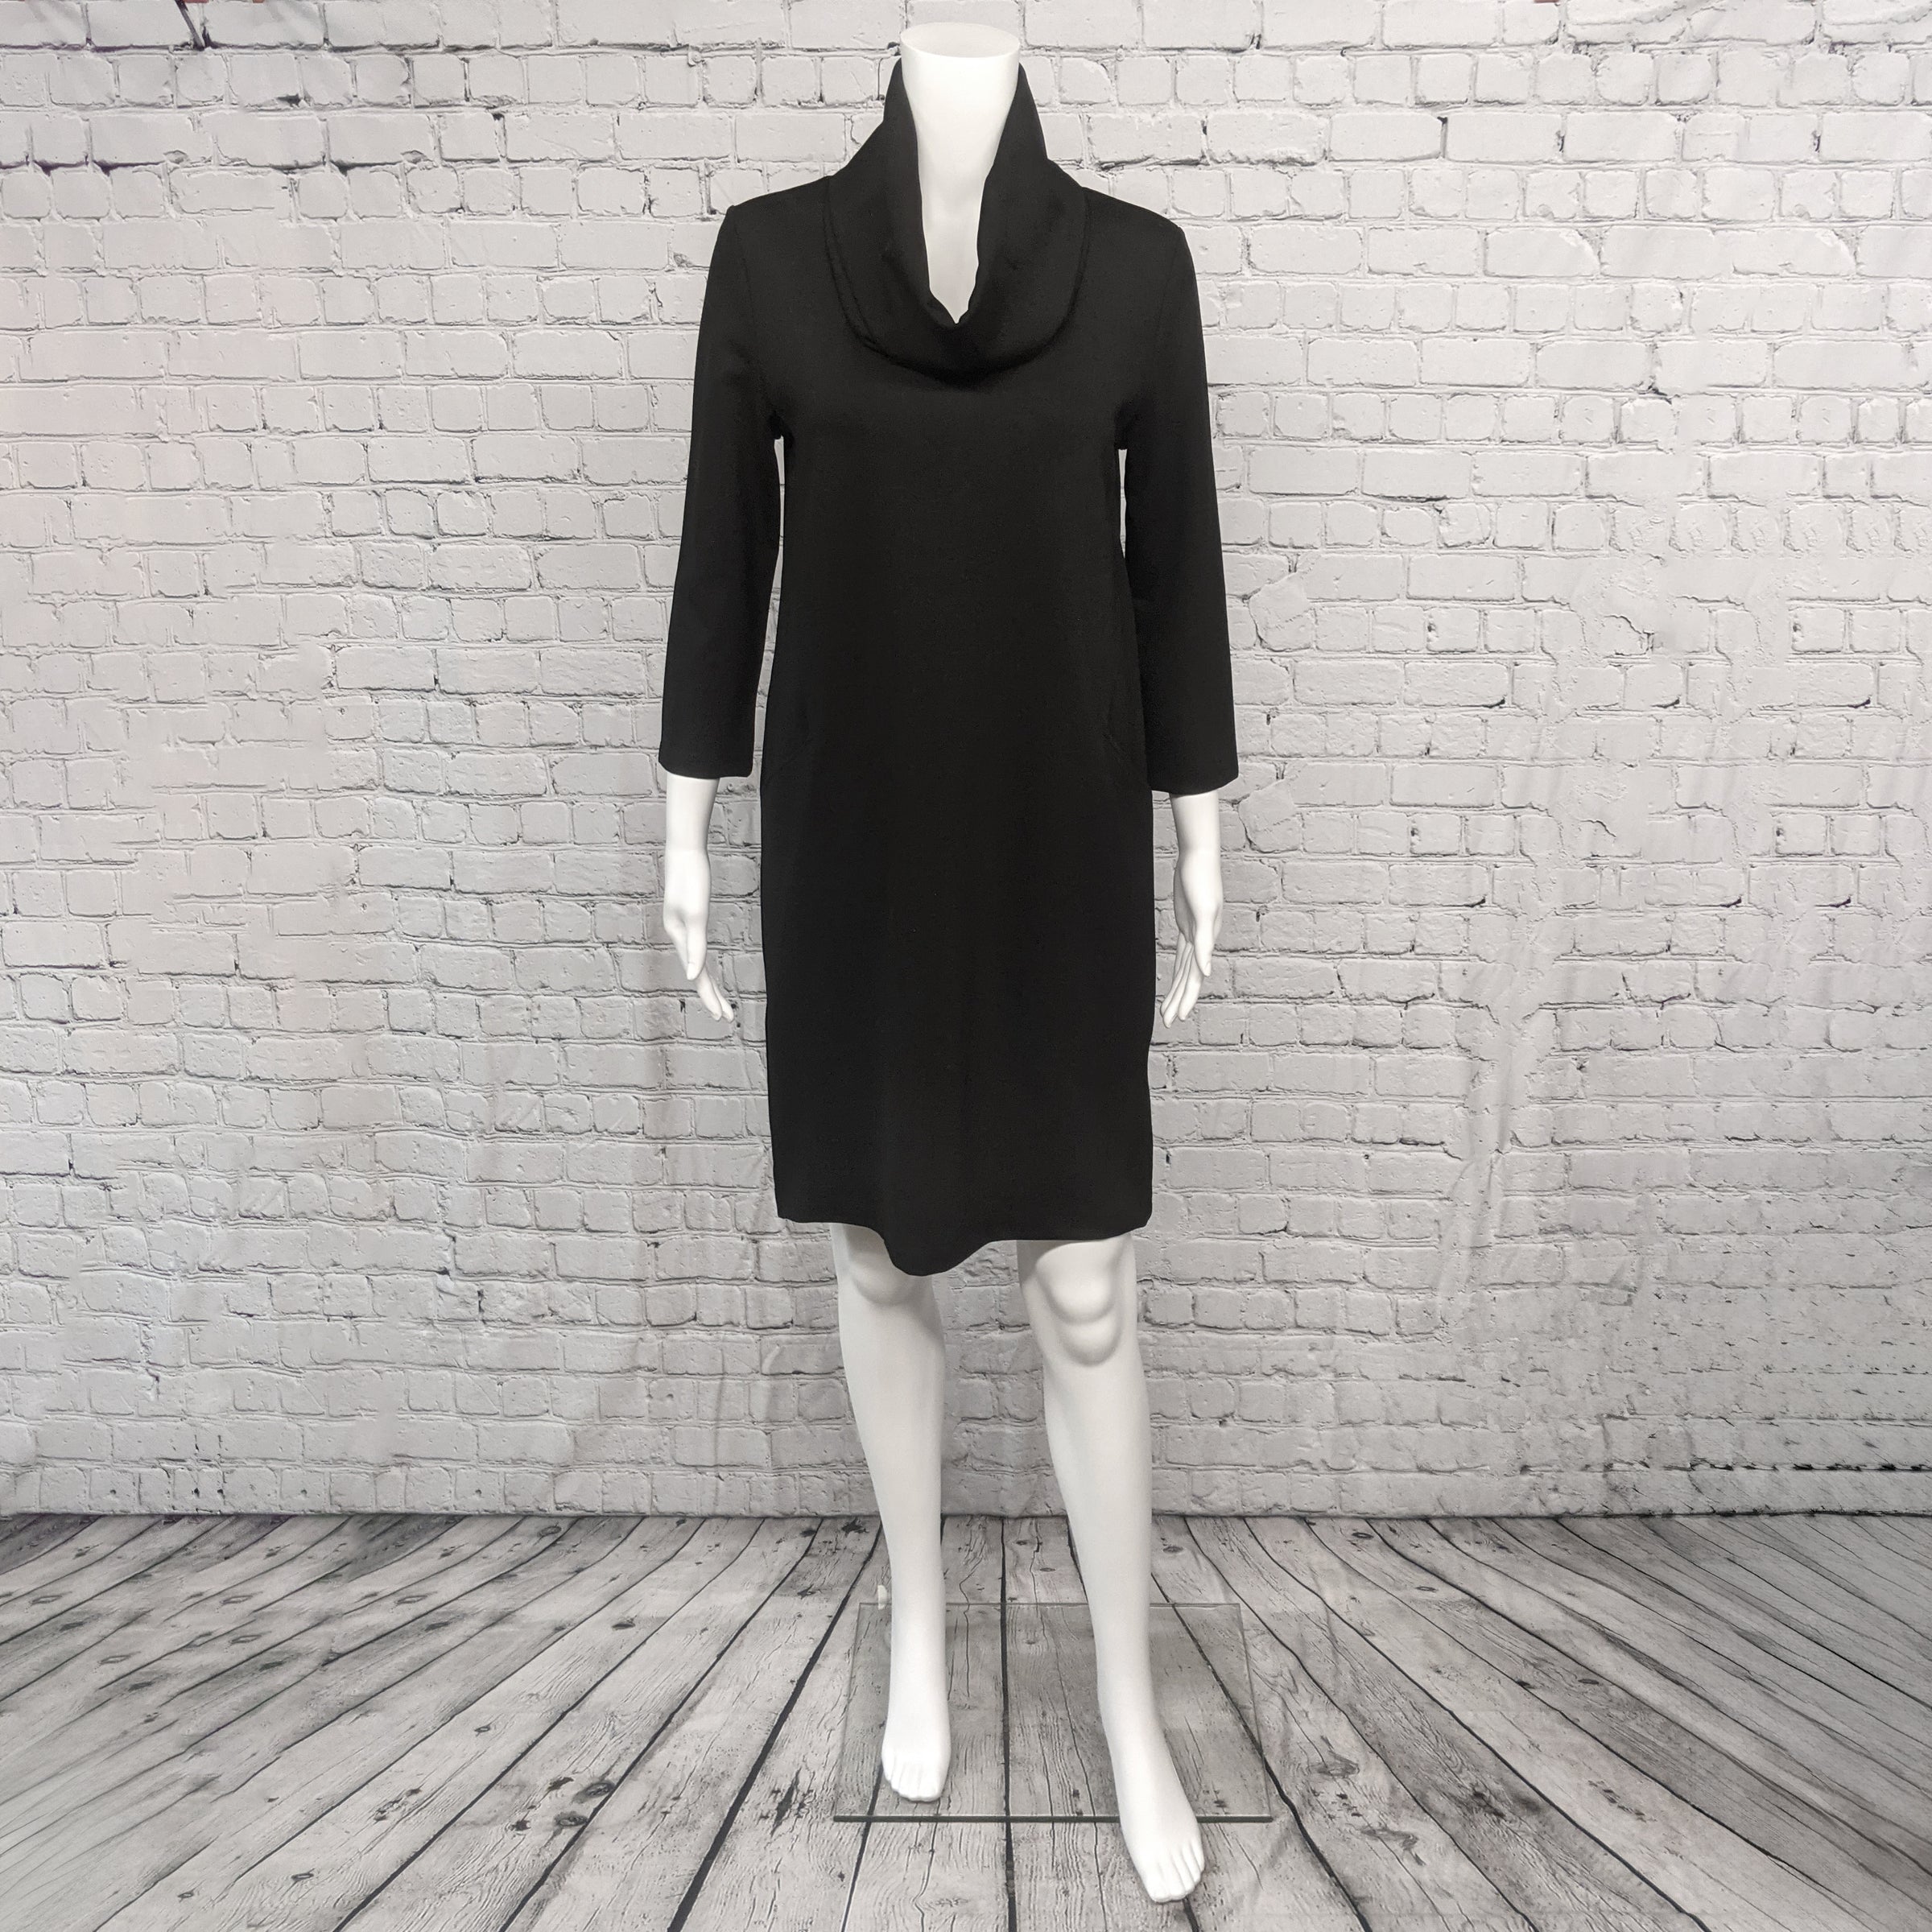 Clothing by San Francisco designer Porto at Fire Opal– Fire Opal Company